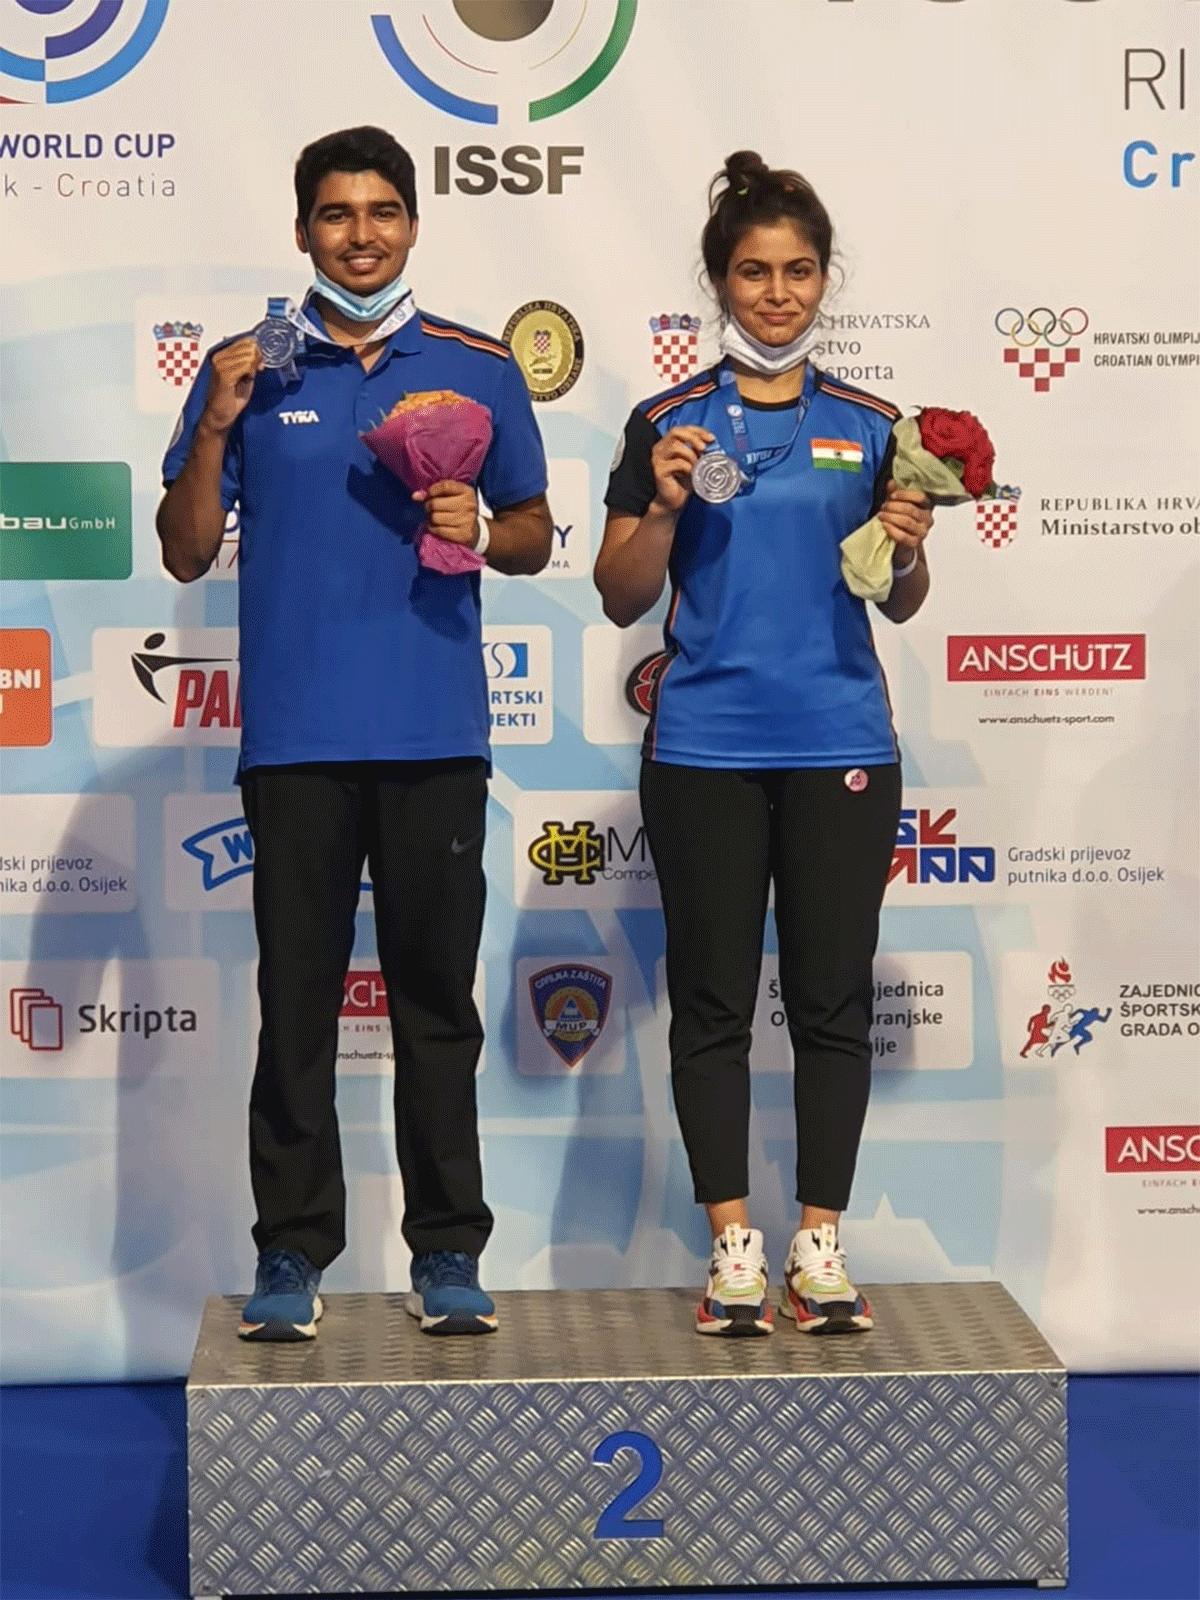 Saurabh Chaudhary and Manu Bhaker on the podium on winning the 10m air pistol mixed team event 